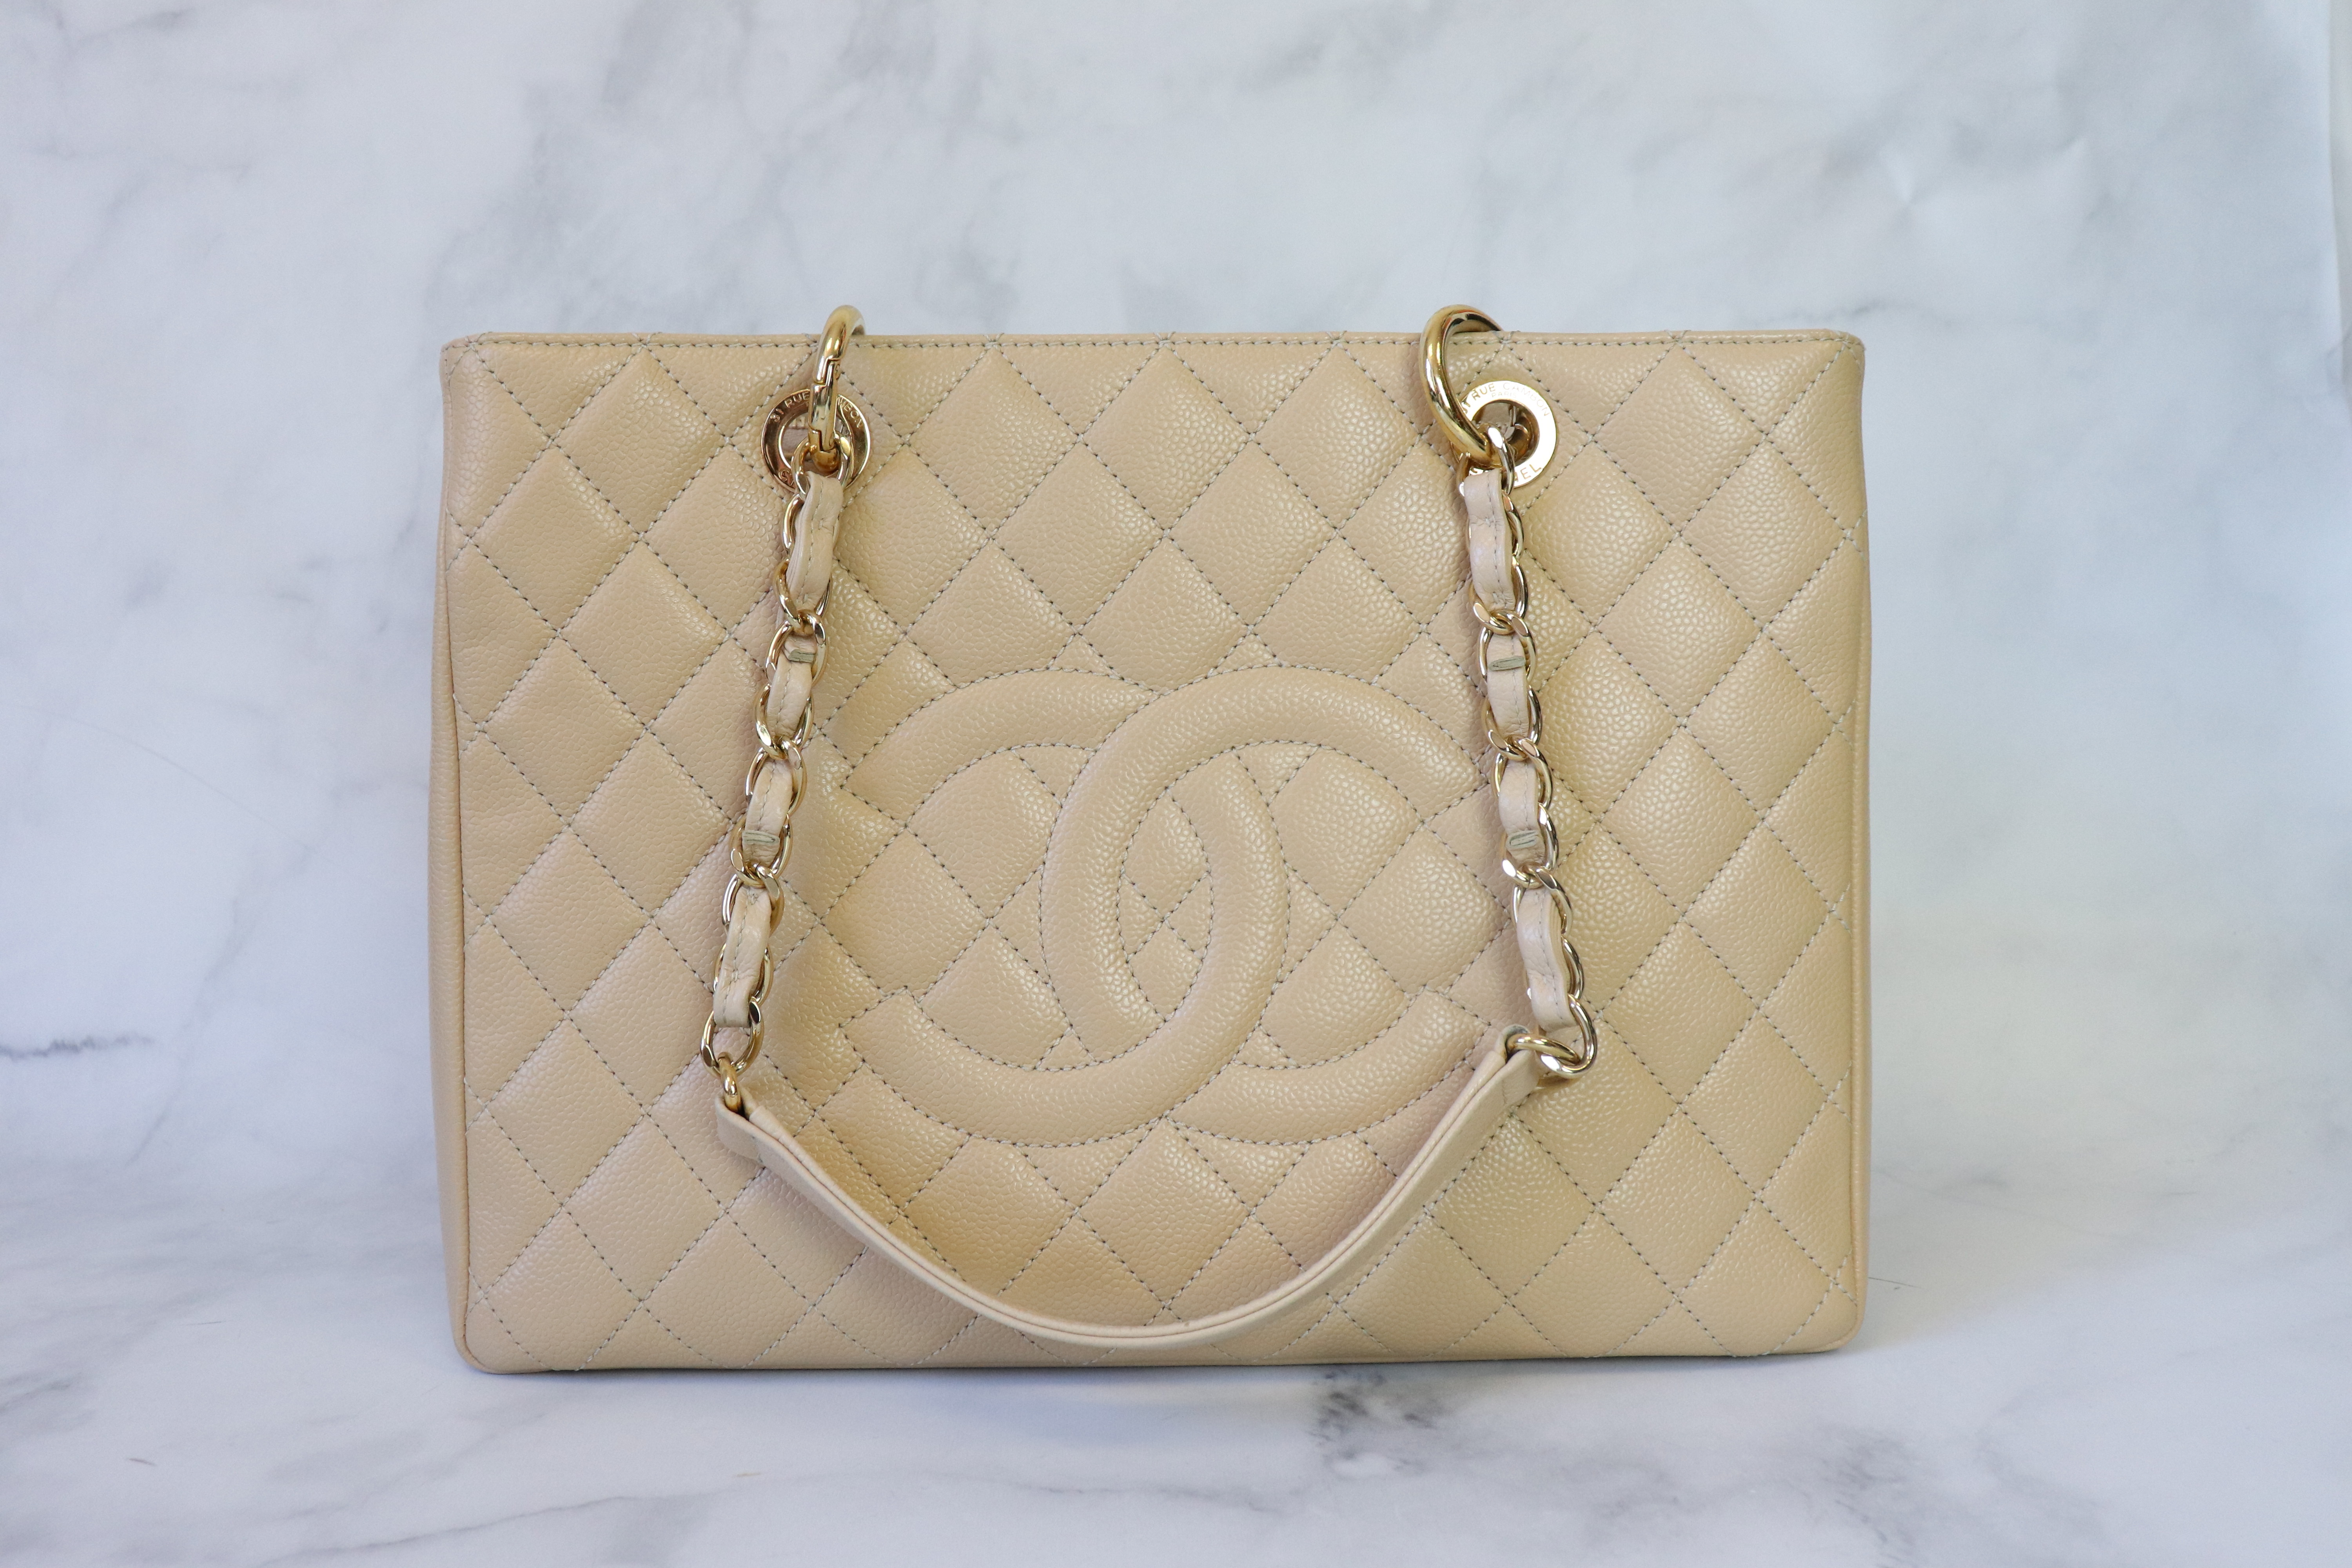 Authentic Chanel GST caviar neutral with gold hardware